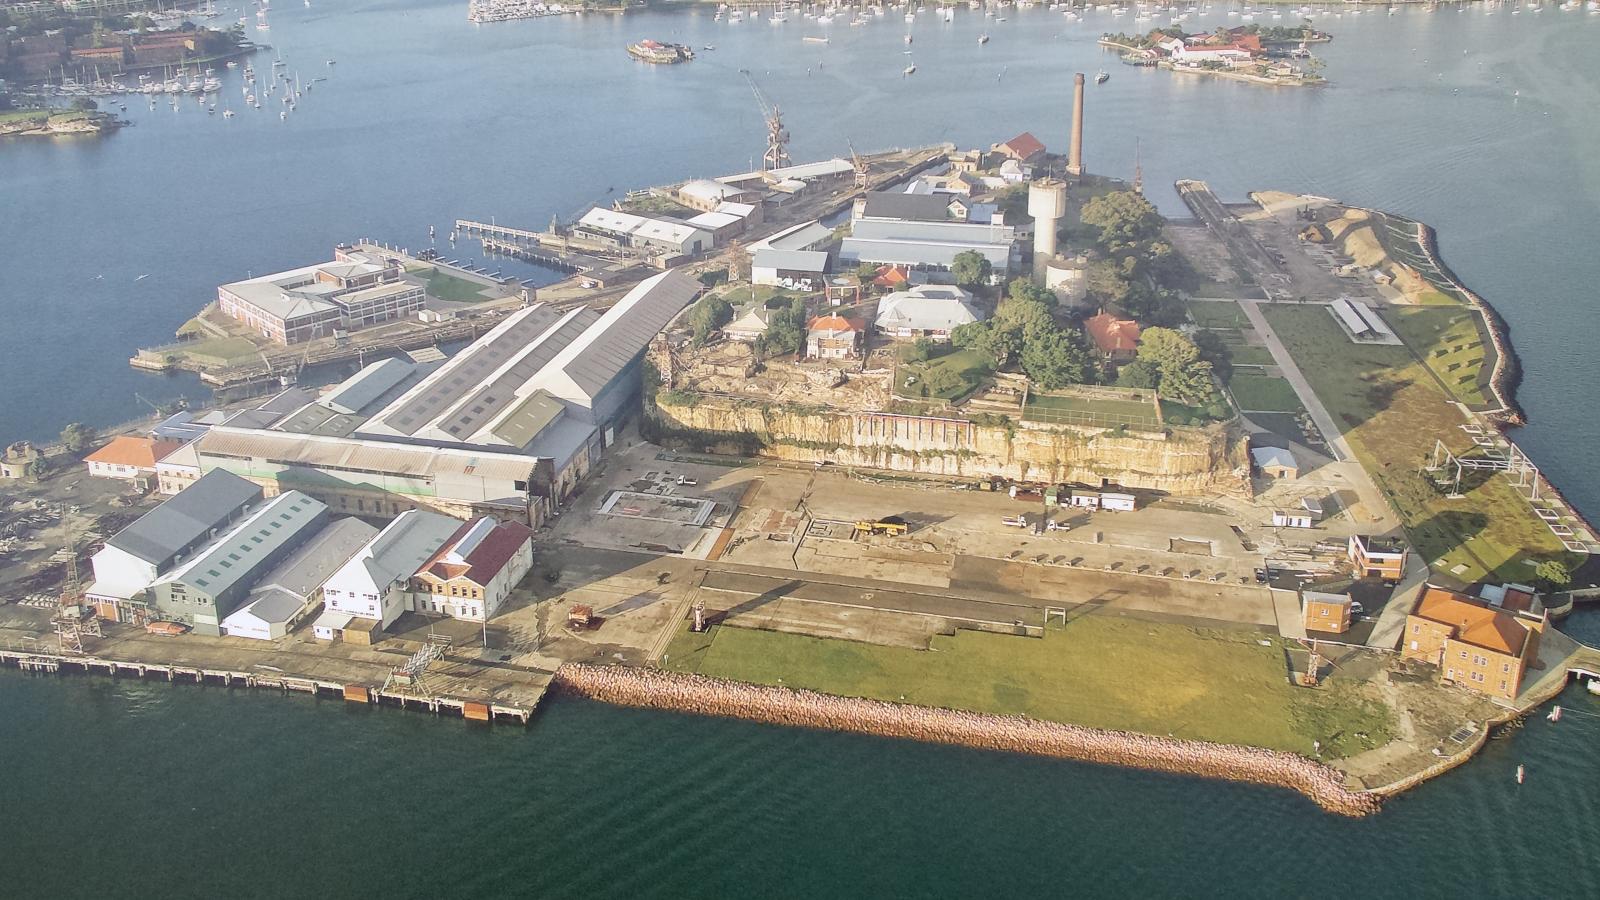 Cockatoo Island - the largest island in Sydney Harbour